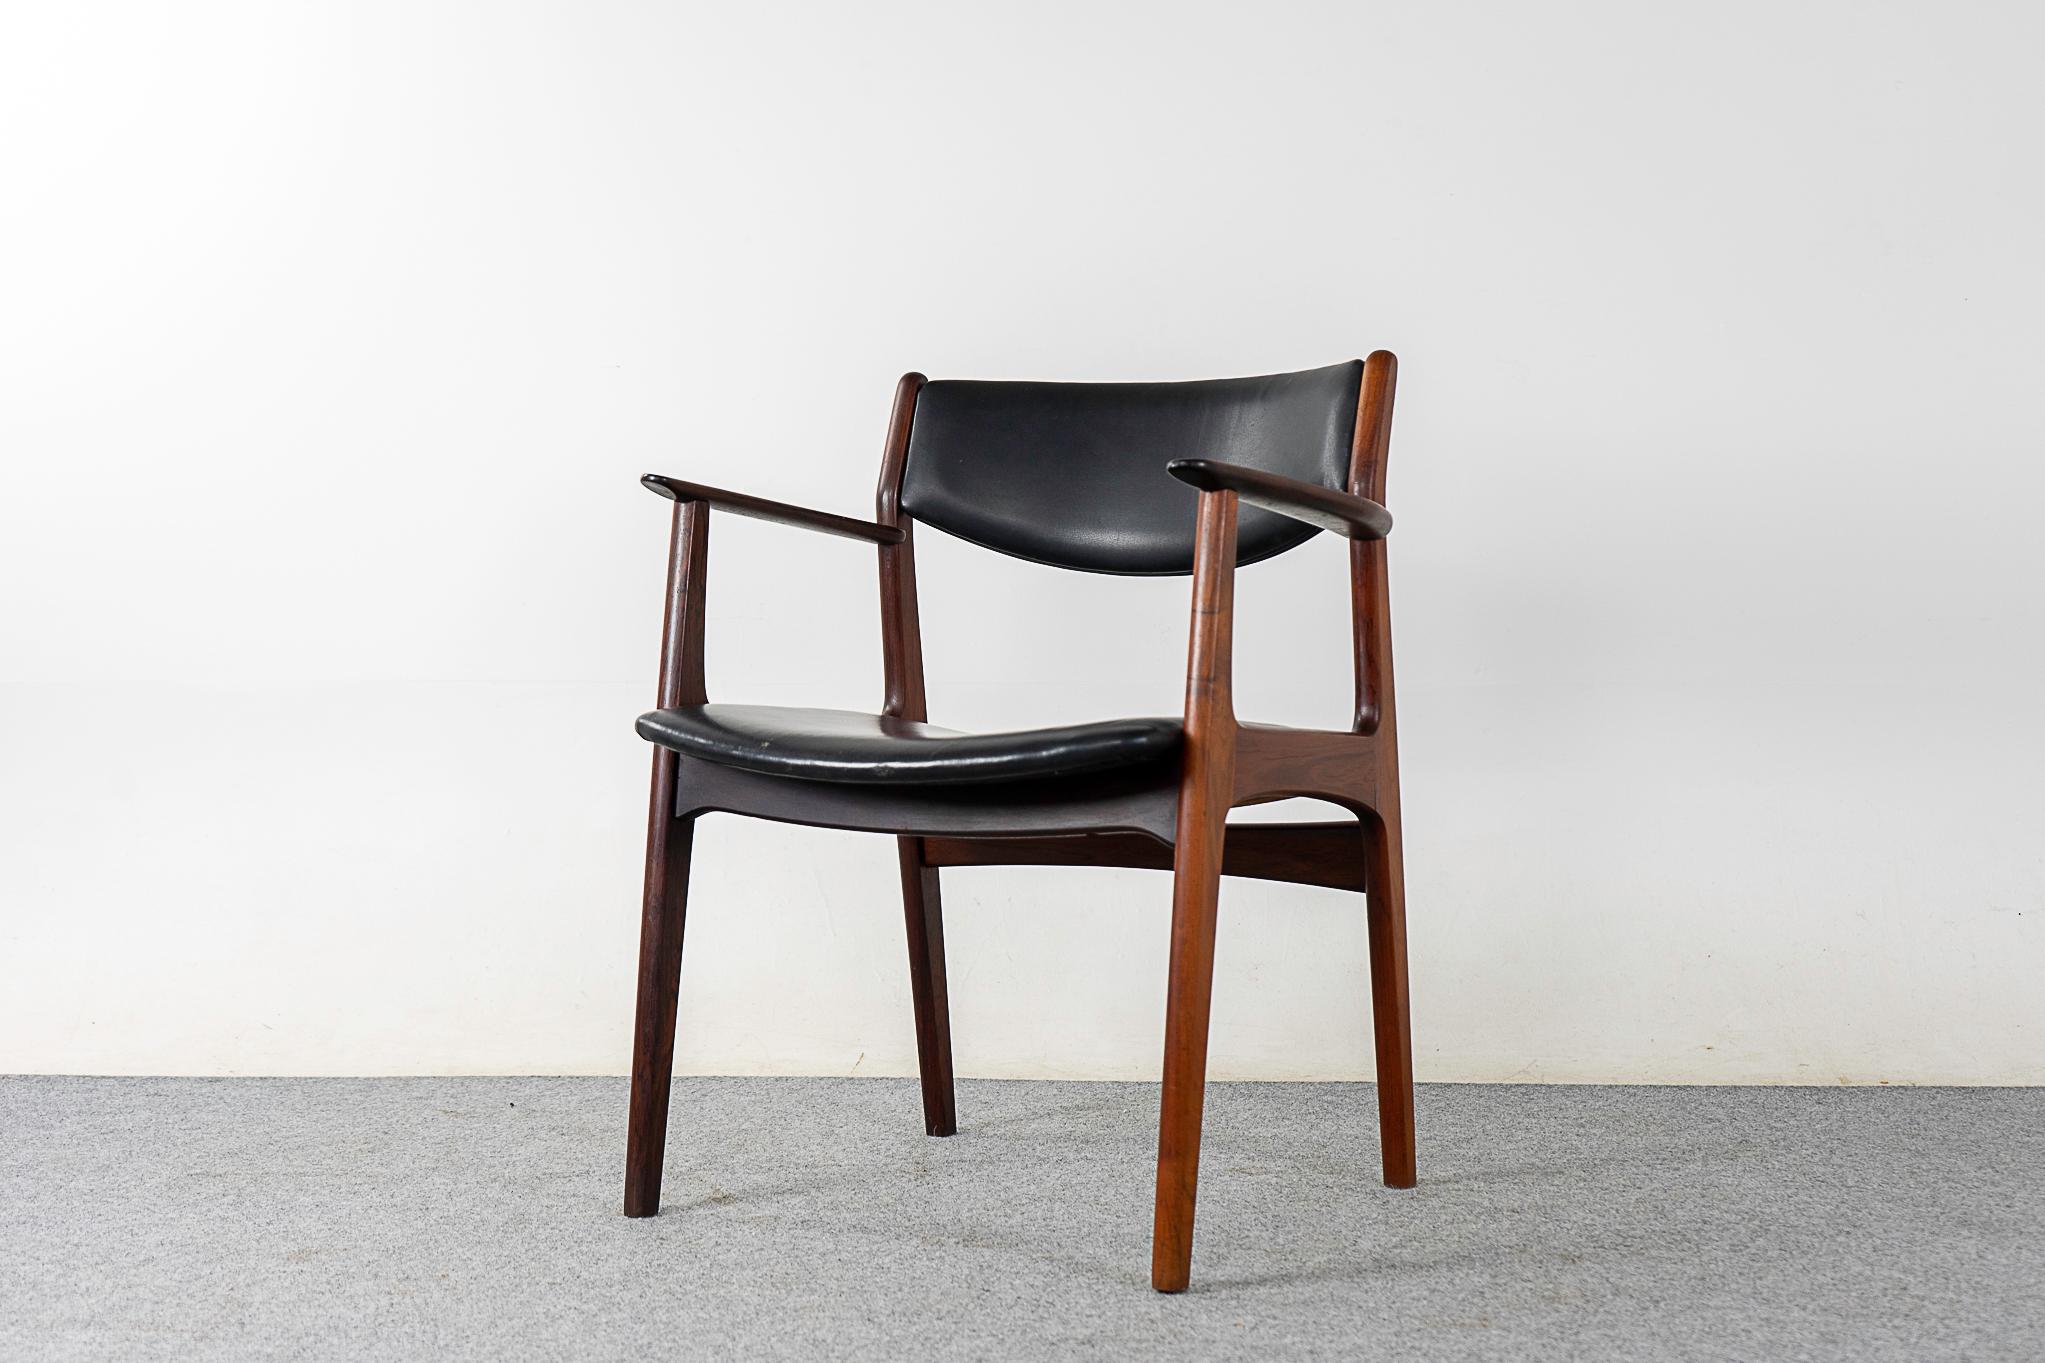 Teak and vinyl mid-century armchair, circa 1960's. Sturdy solid wood frame with lovely lines. Original upholstery in nice condition. Comfortable and stylish! 

Please inquire for remote and international shipping rates.